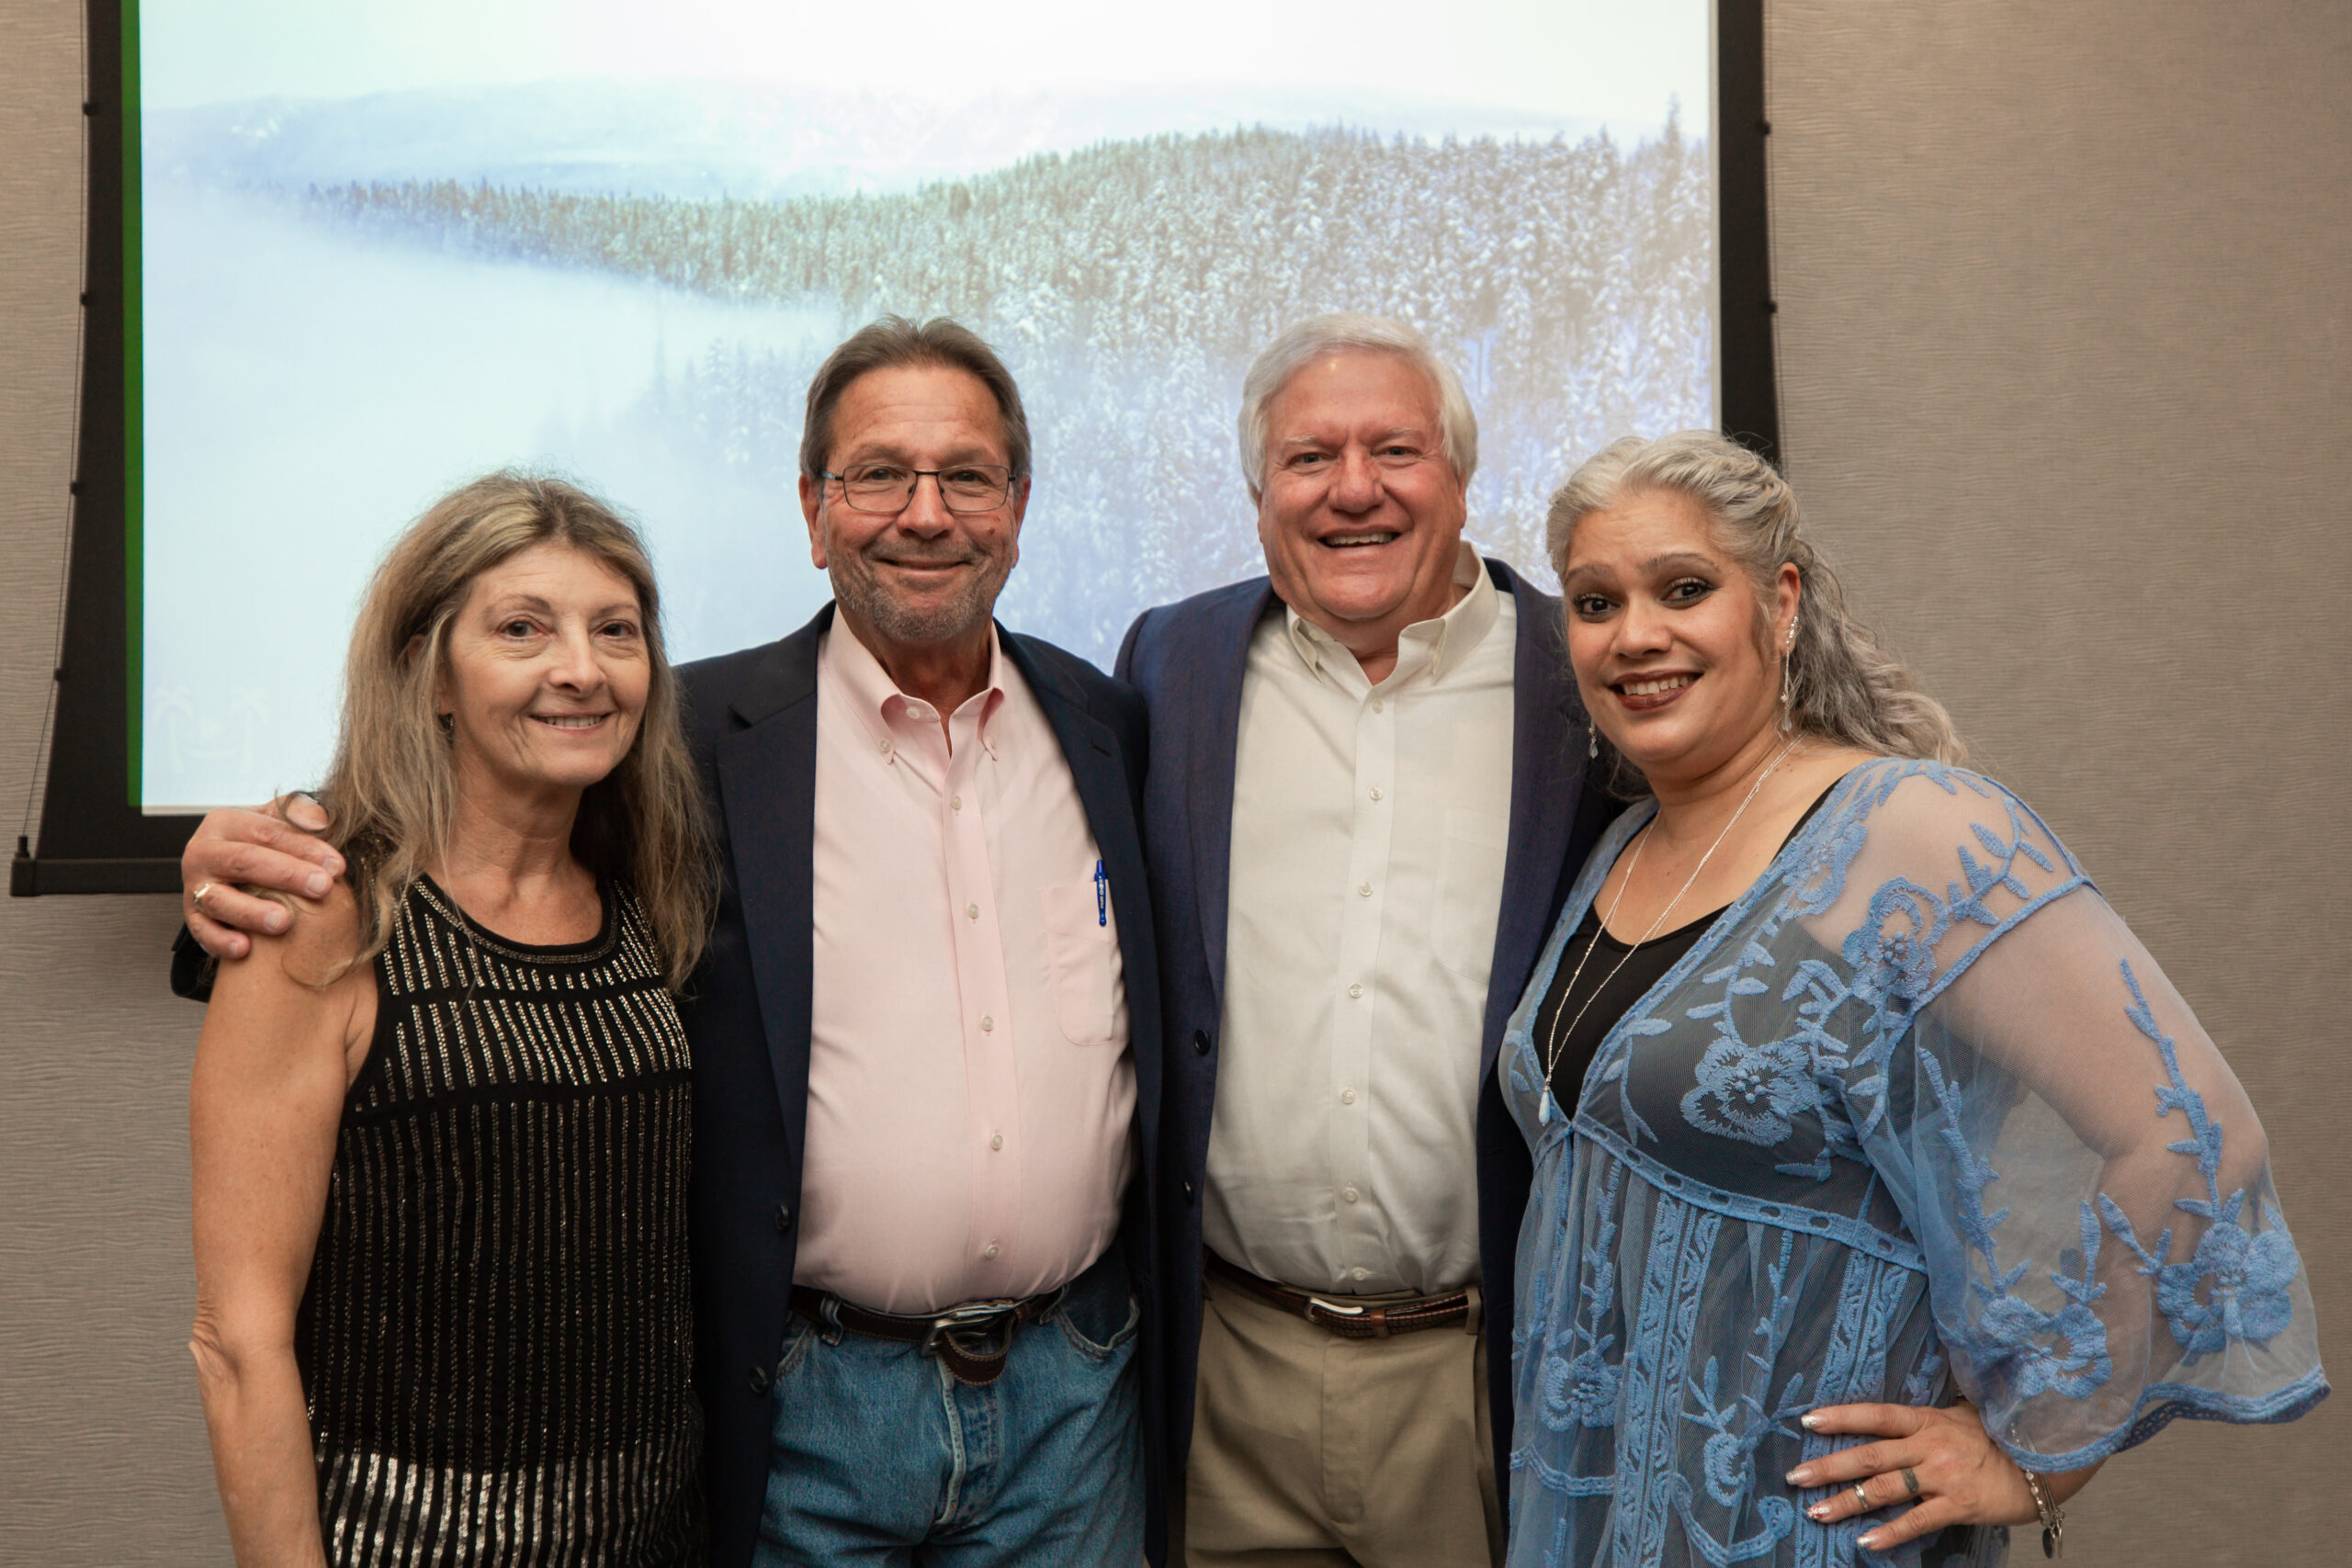 Waterford Oaks team group hug. From left to right, Accountant Lynne Jessup, Supervisor Robert Palmer, Vice-President John Jobson and Property Manager and Realtor Lisa Melendez